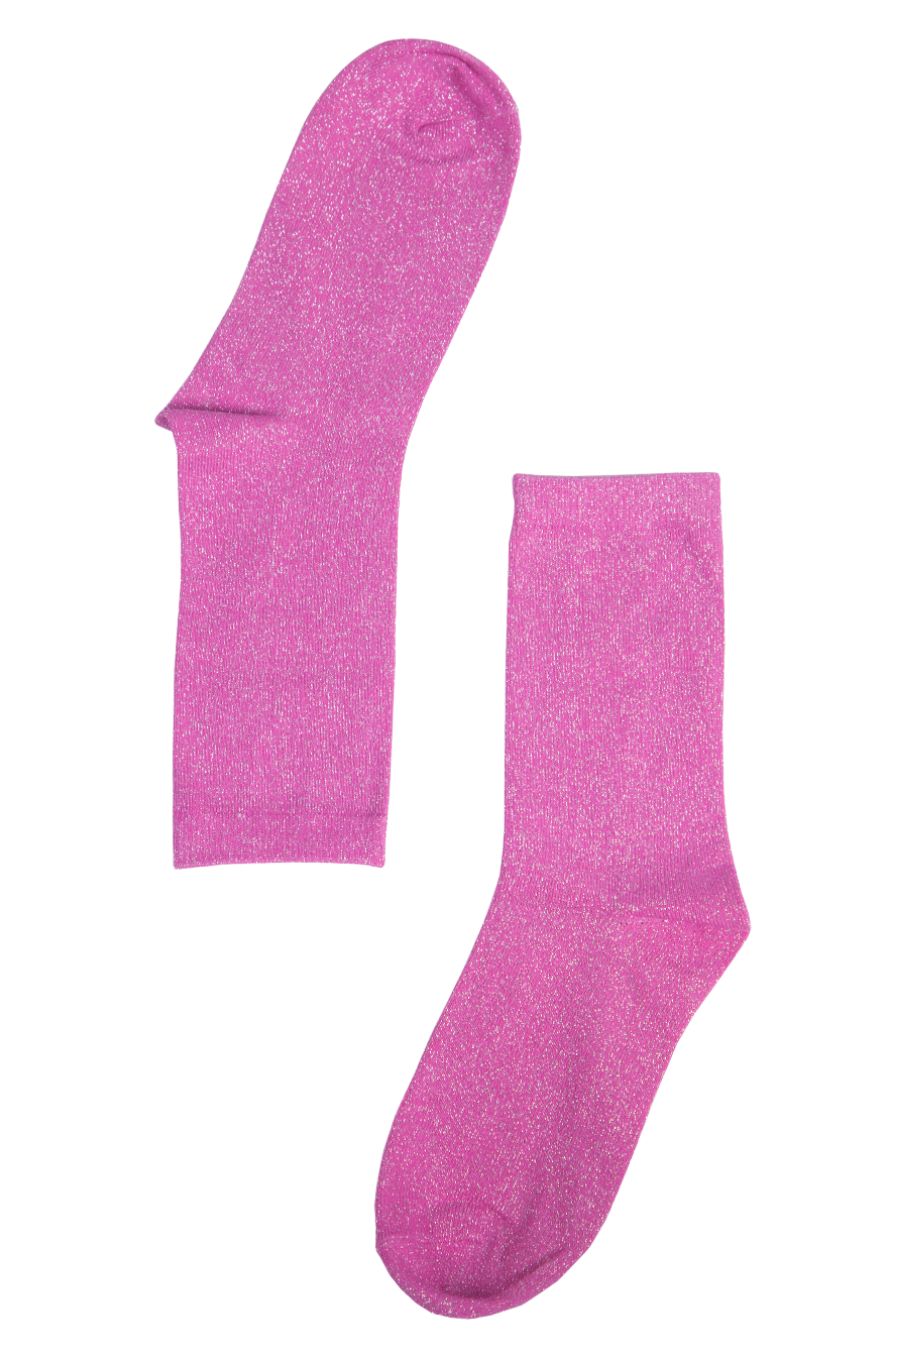 pink and silver glitter ankle socks